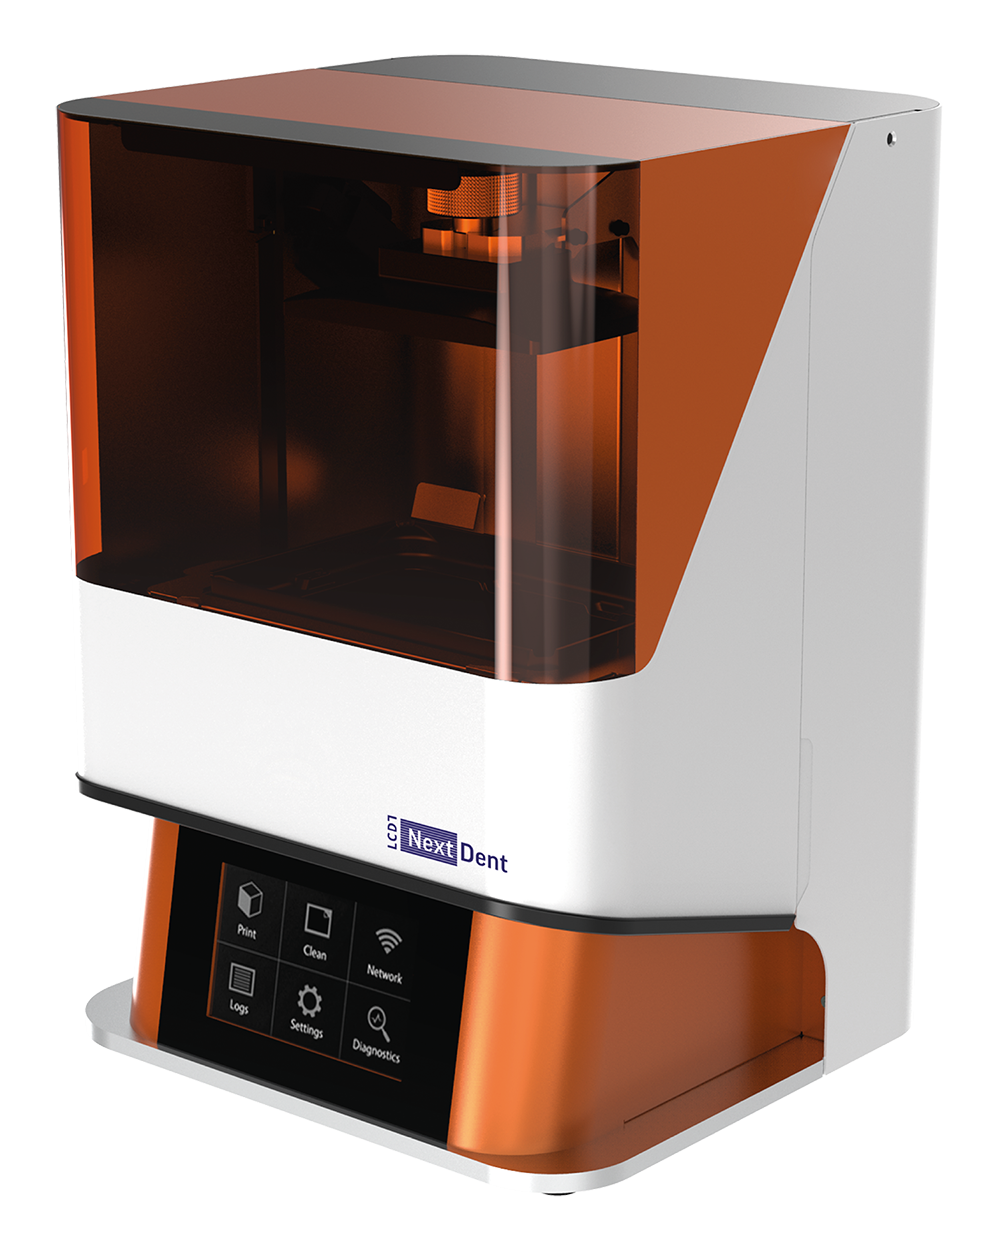 The new NextDent LCD1 3D printing platform features a smaller footprint, easy-to-use printer designed to deliver high-quality results. 